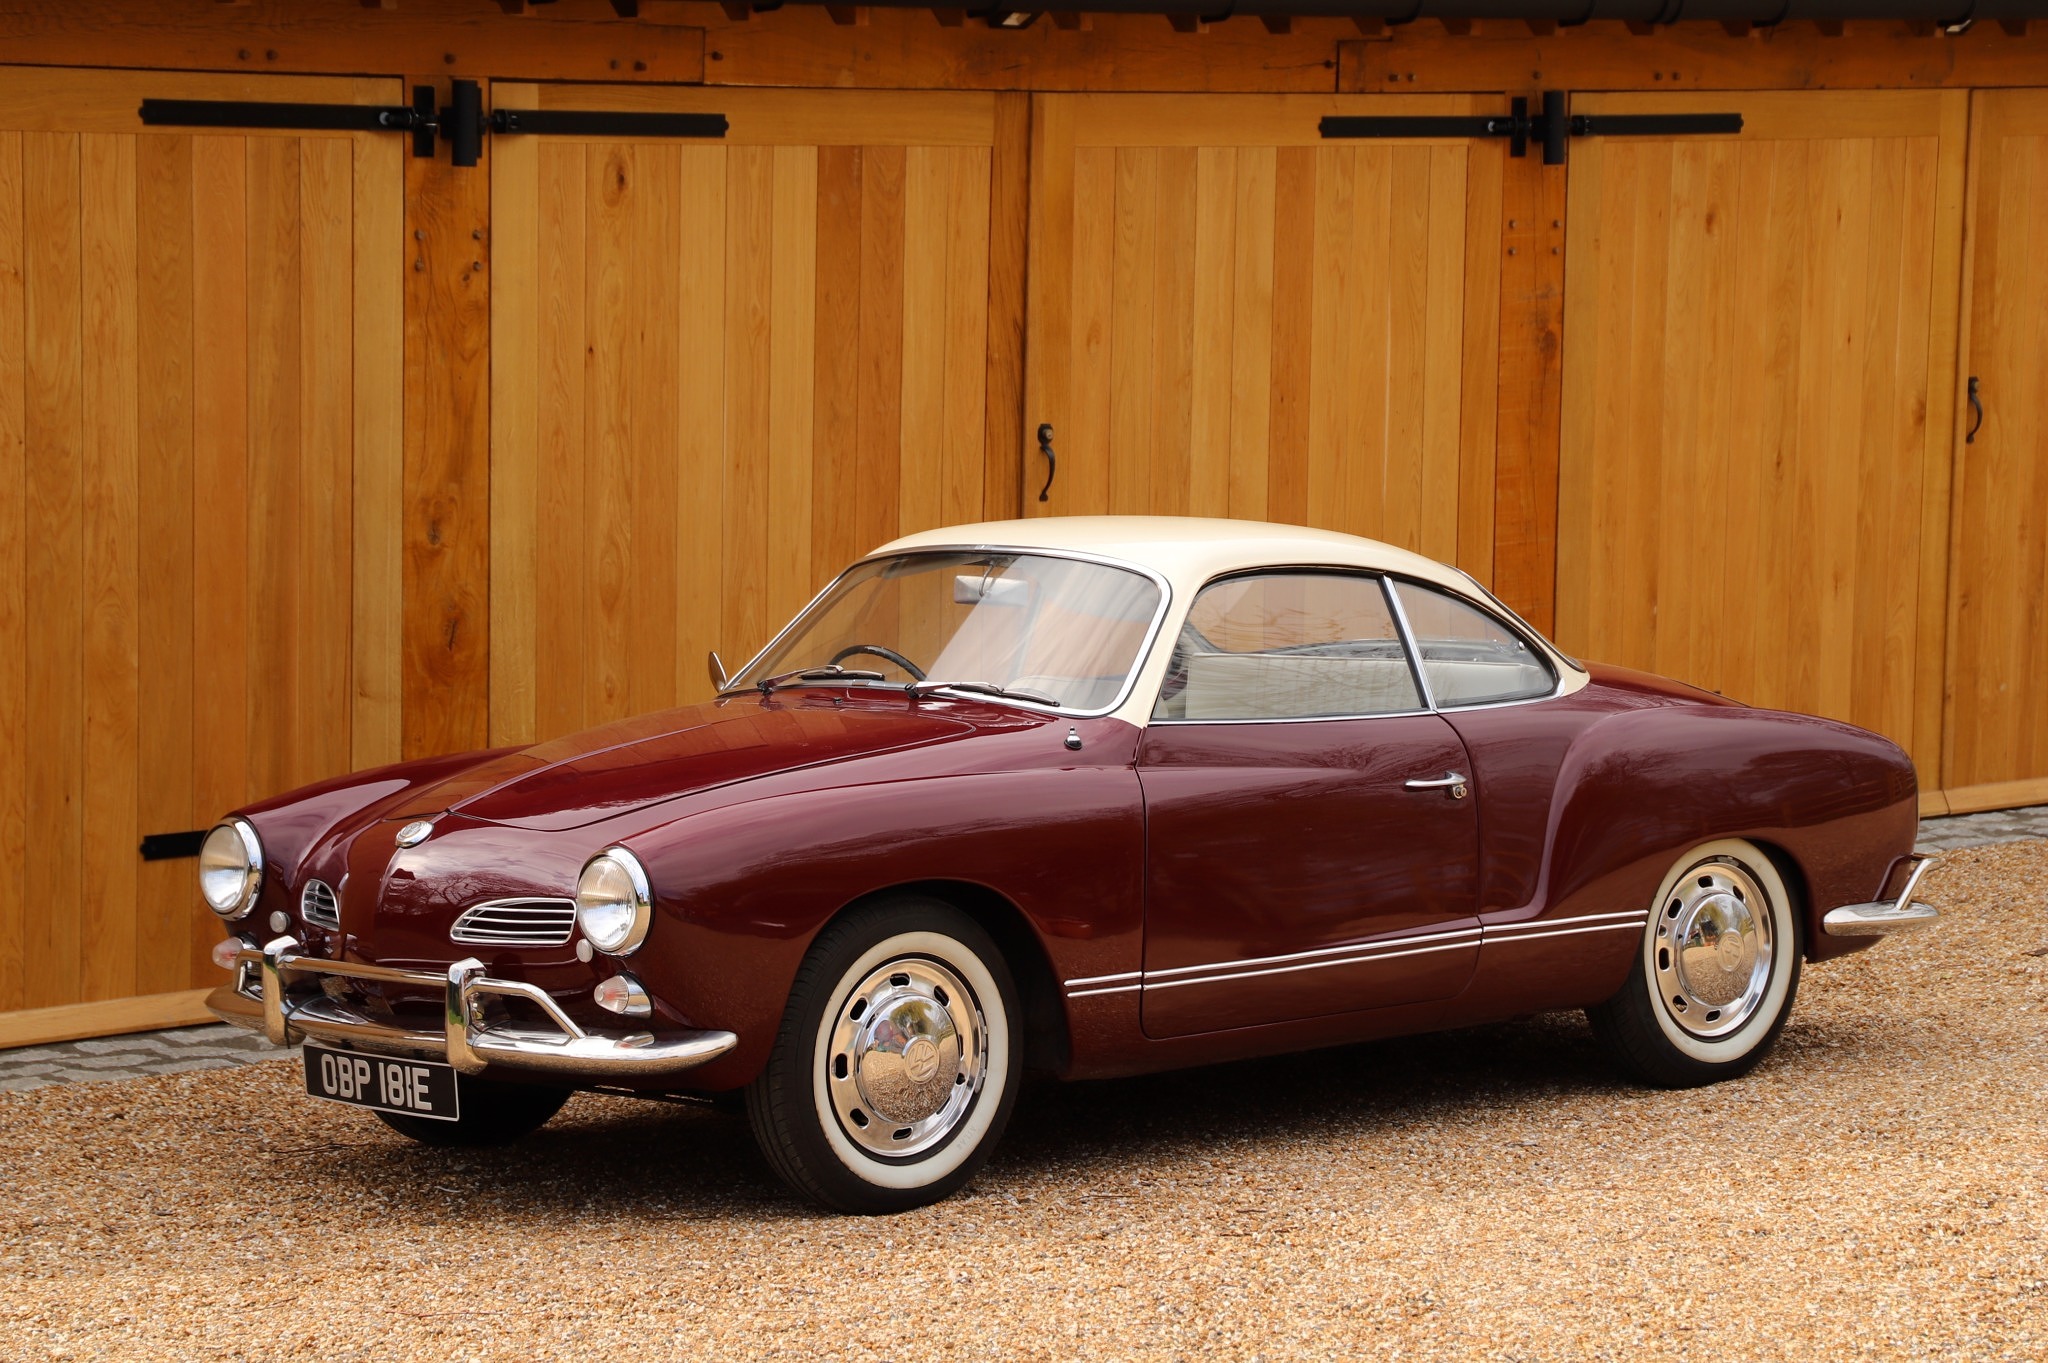 Vw Karmann Ghia Right Hand Drive Stunning In Burgundy Red With A